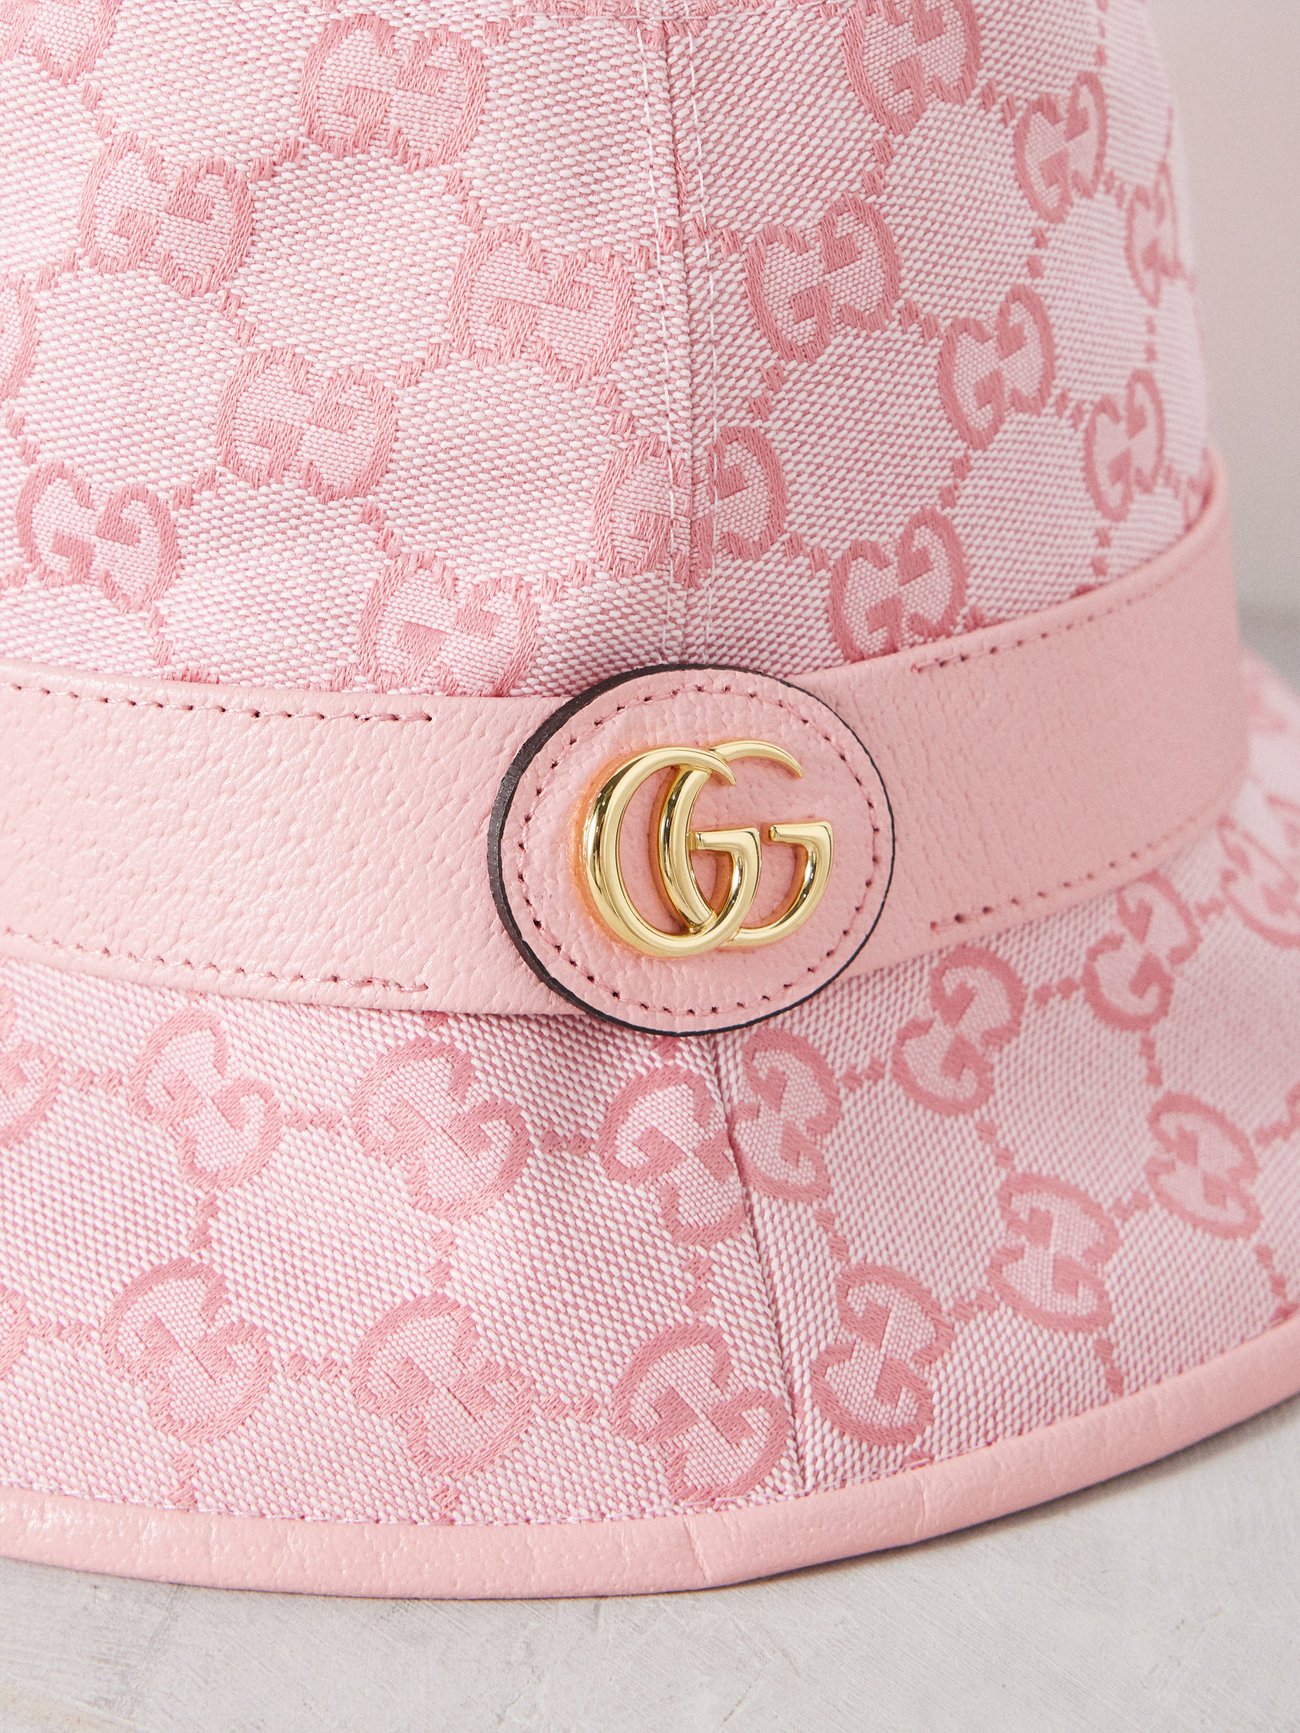 Shop GUCCI GG Supreme 2023 SS Street Style Bucket Hats Wide